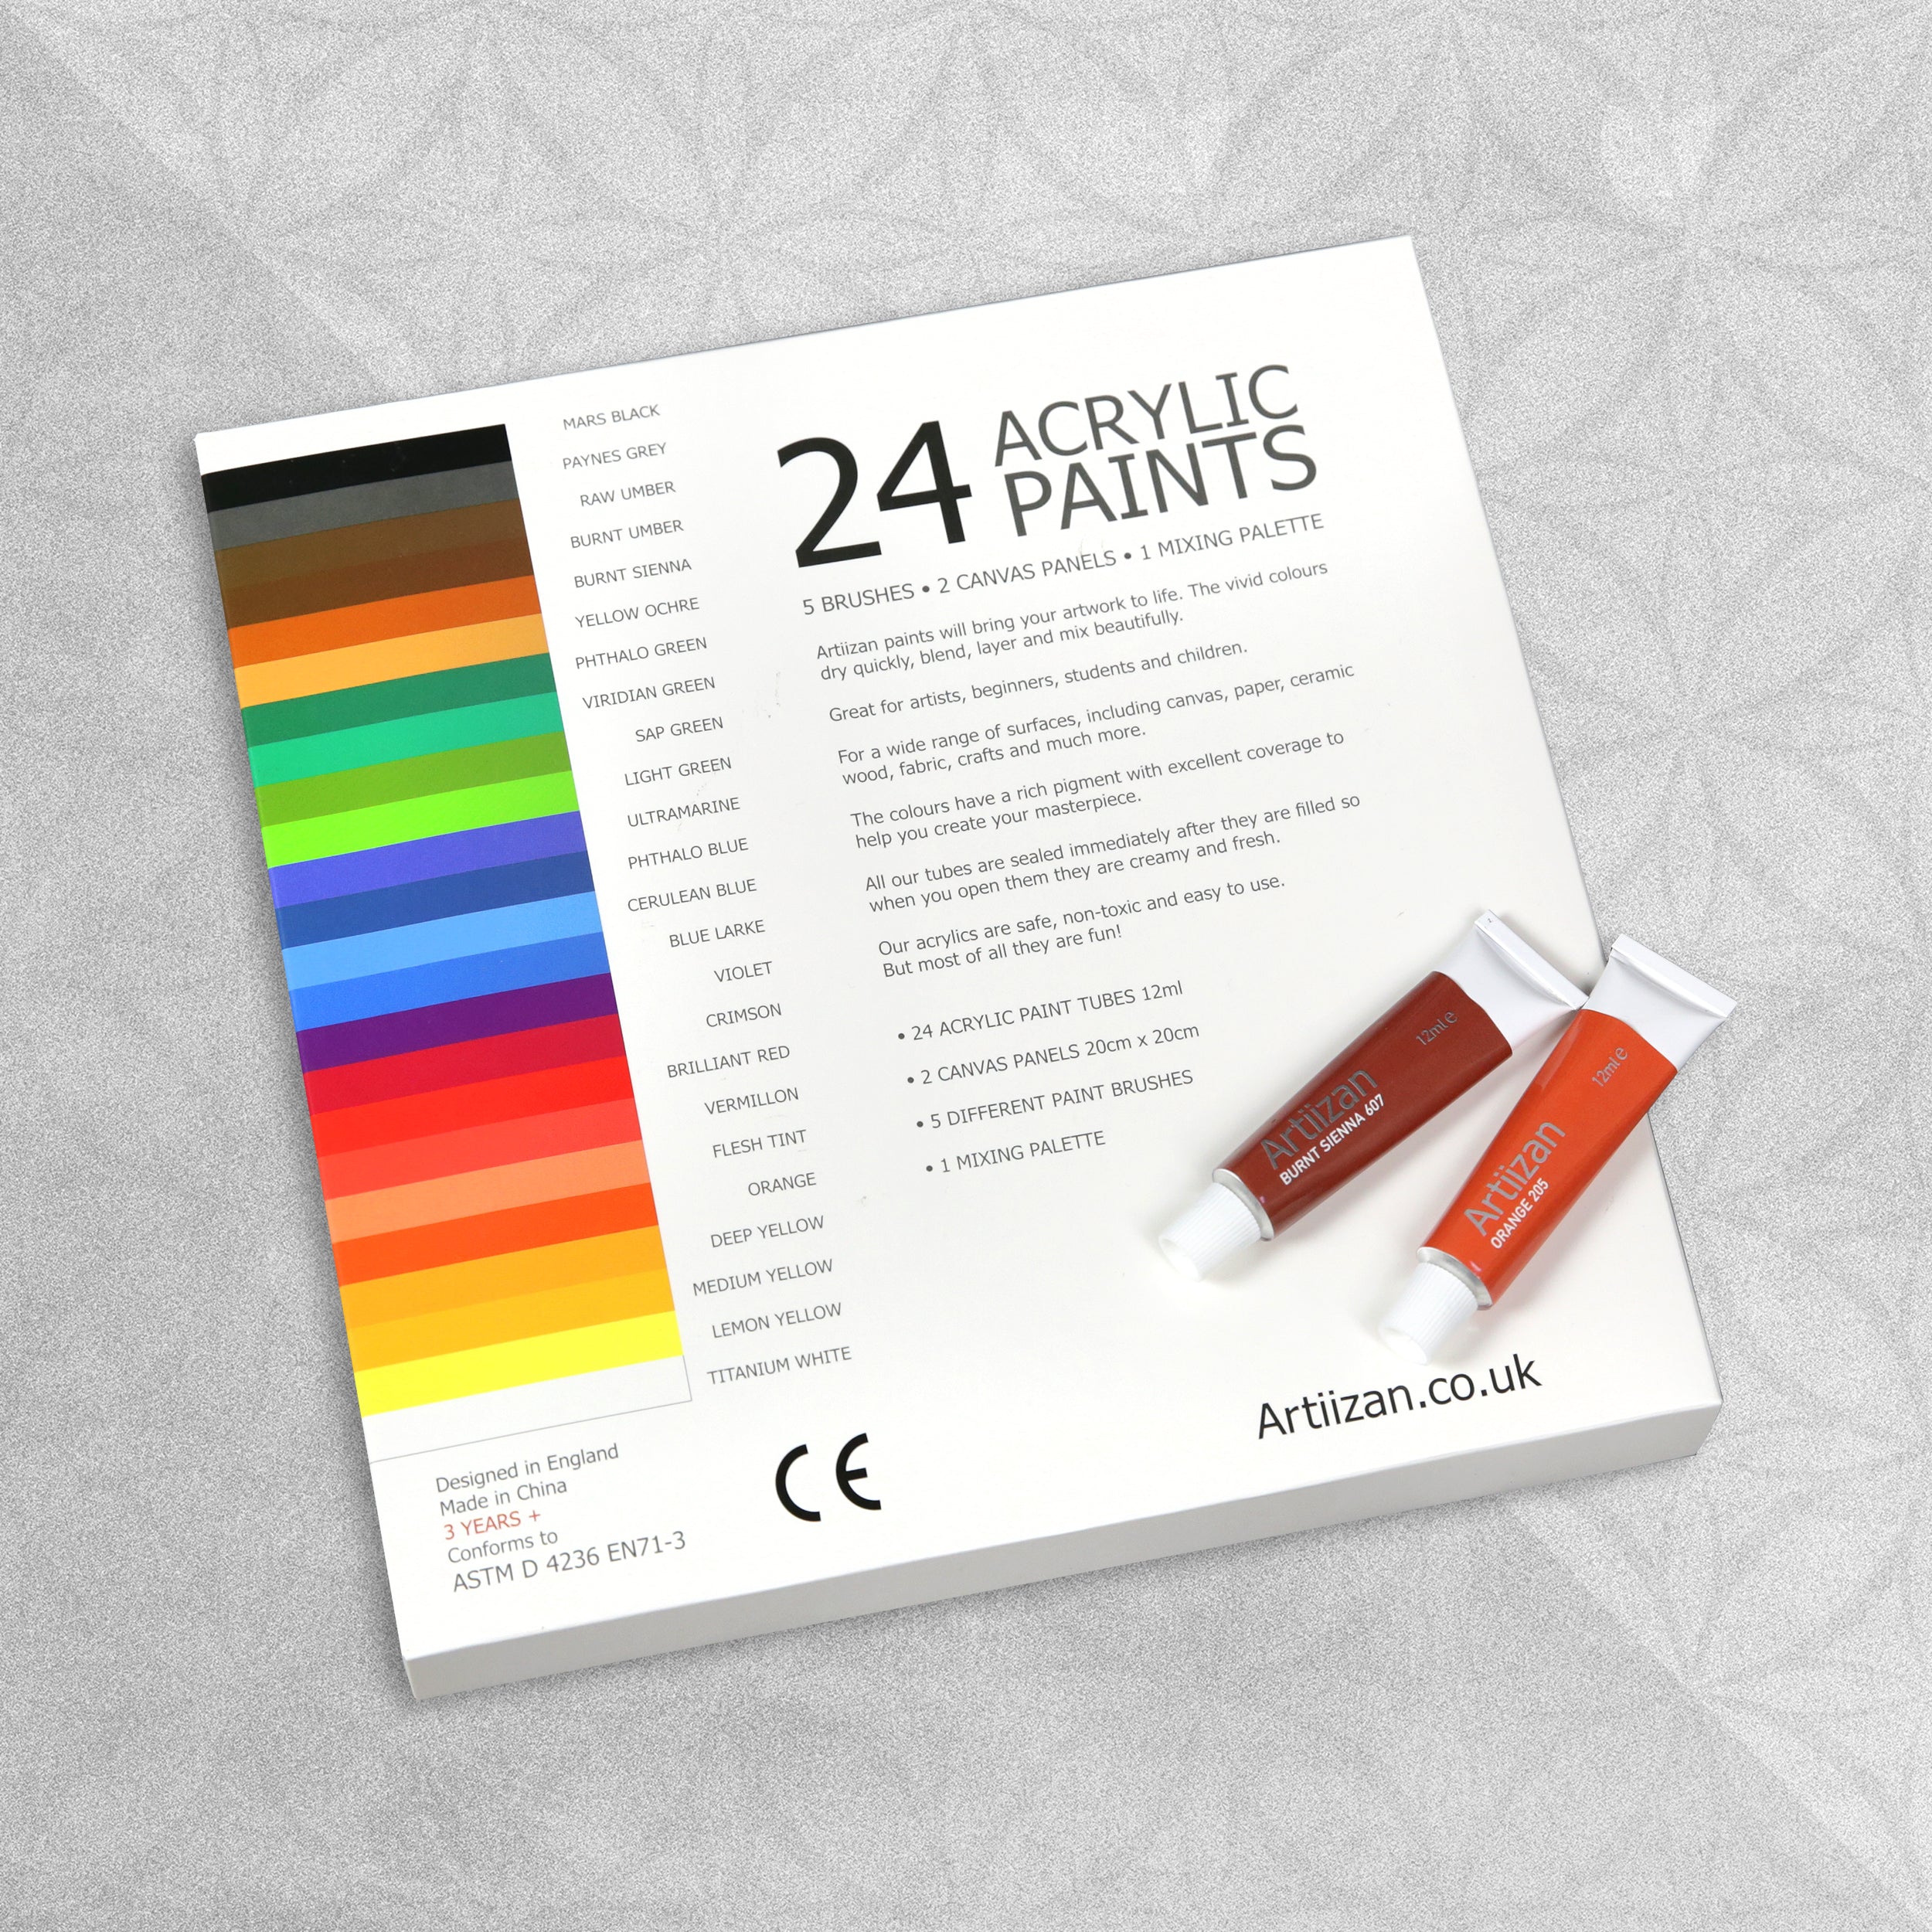 Artiizan Acrylic Paint Set - Pack of 24 12ml Tubes with Brushes, Canvas Panels & Mixing Palette